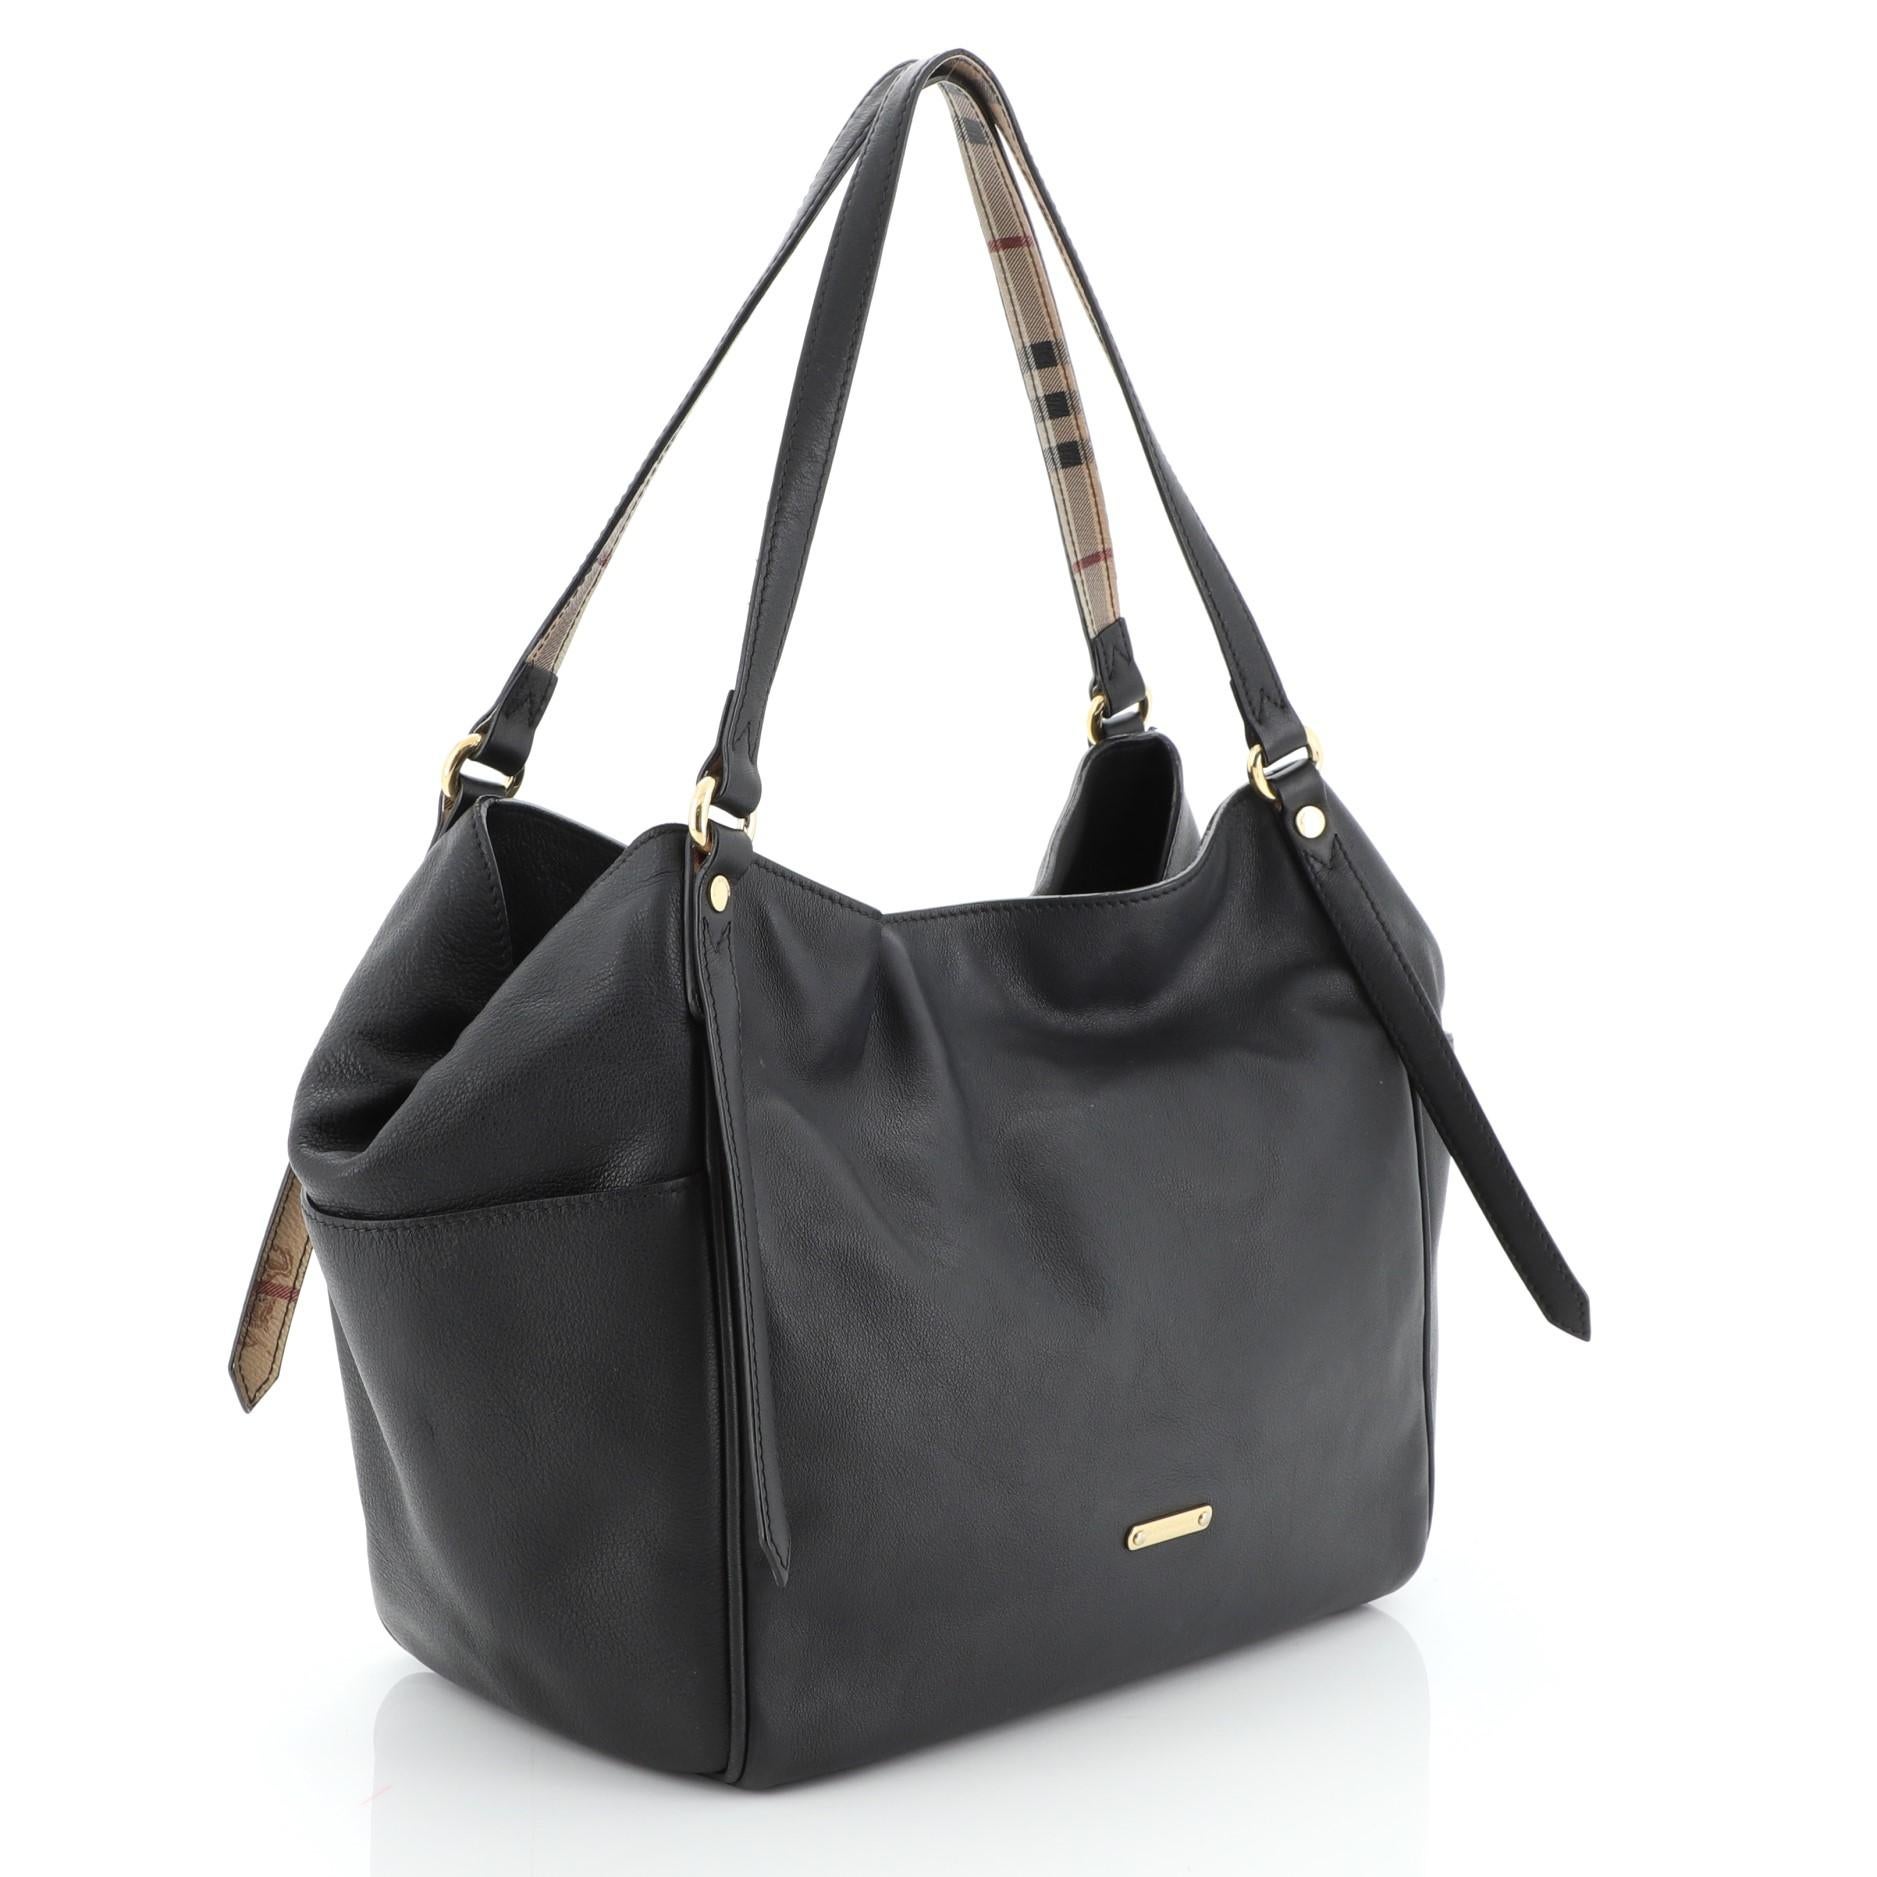 This Burberry Canterbury Tote Leather Small, crafted from black leather, features dual tall adjustable handles, Burberry logo, and gold-tone hardware. Its magnetic snap closure opens to a black fabric interior with side wall zip and slip pockets